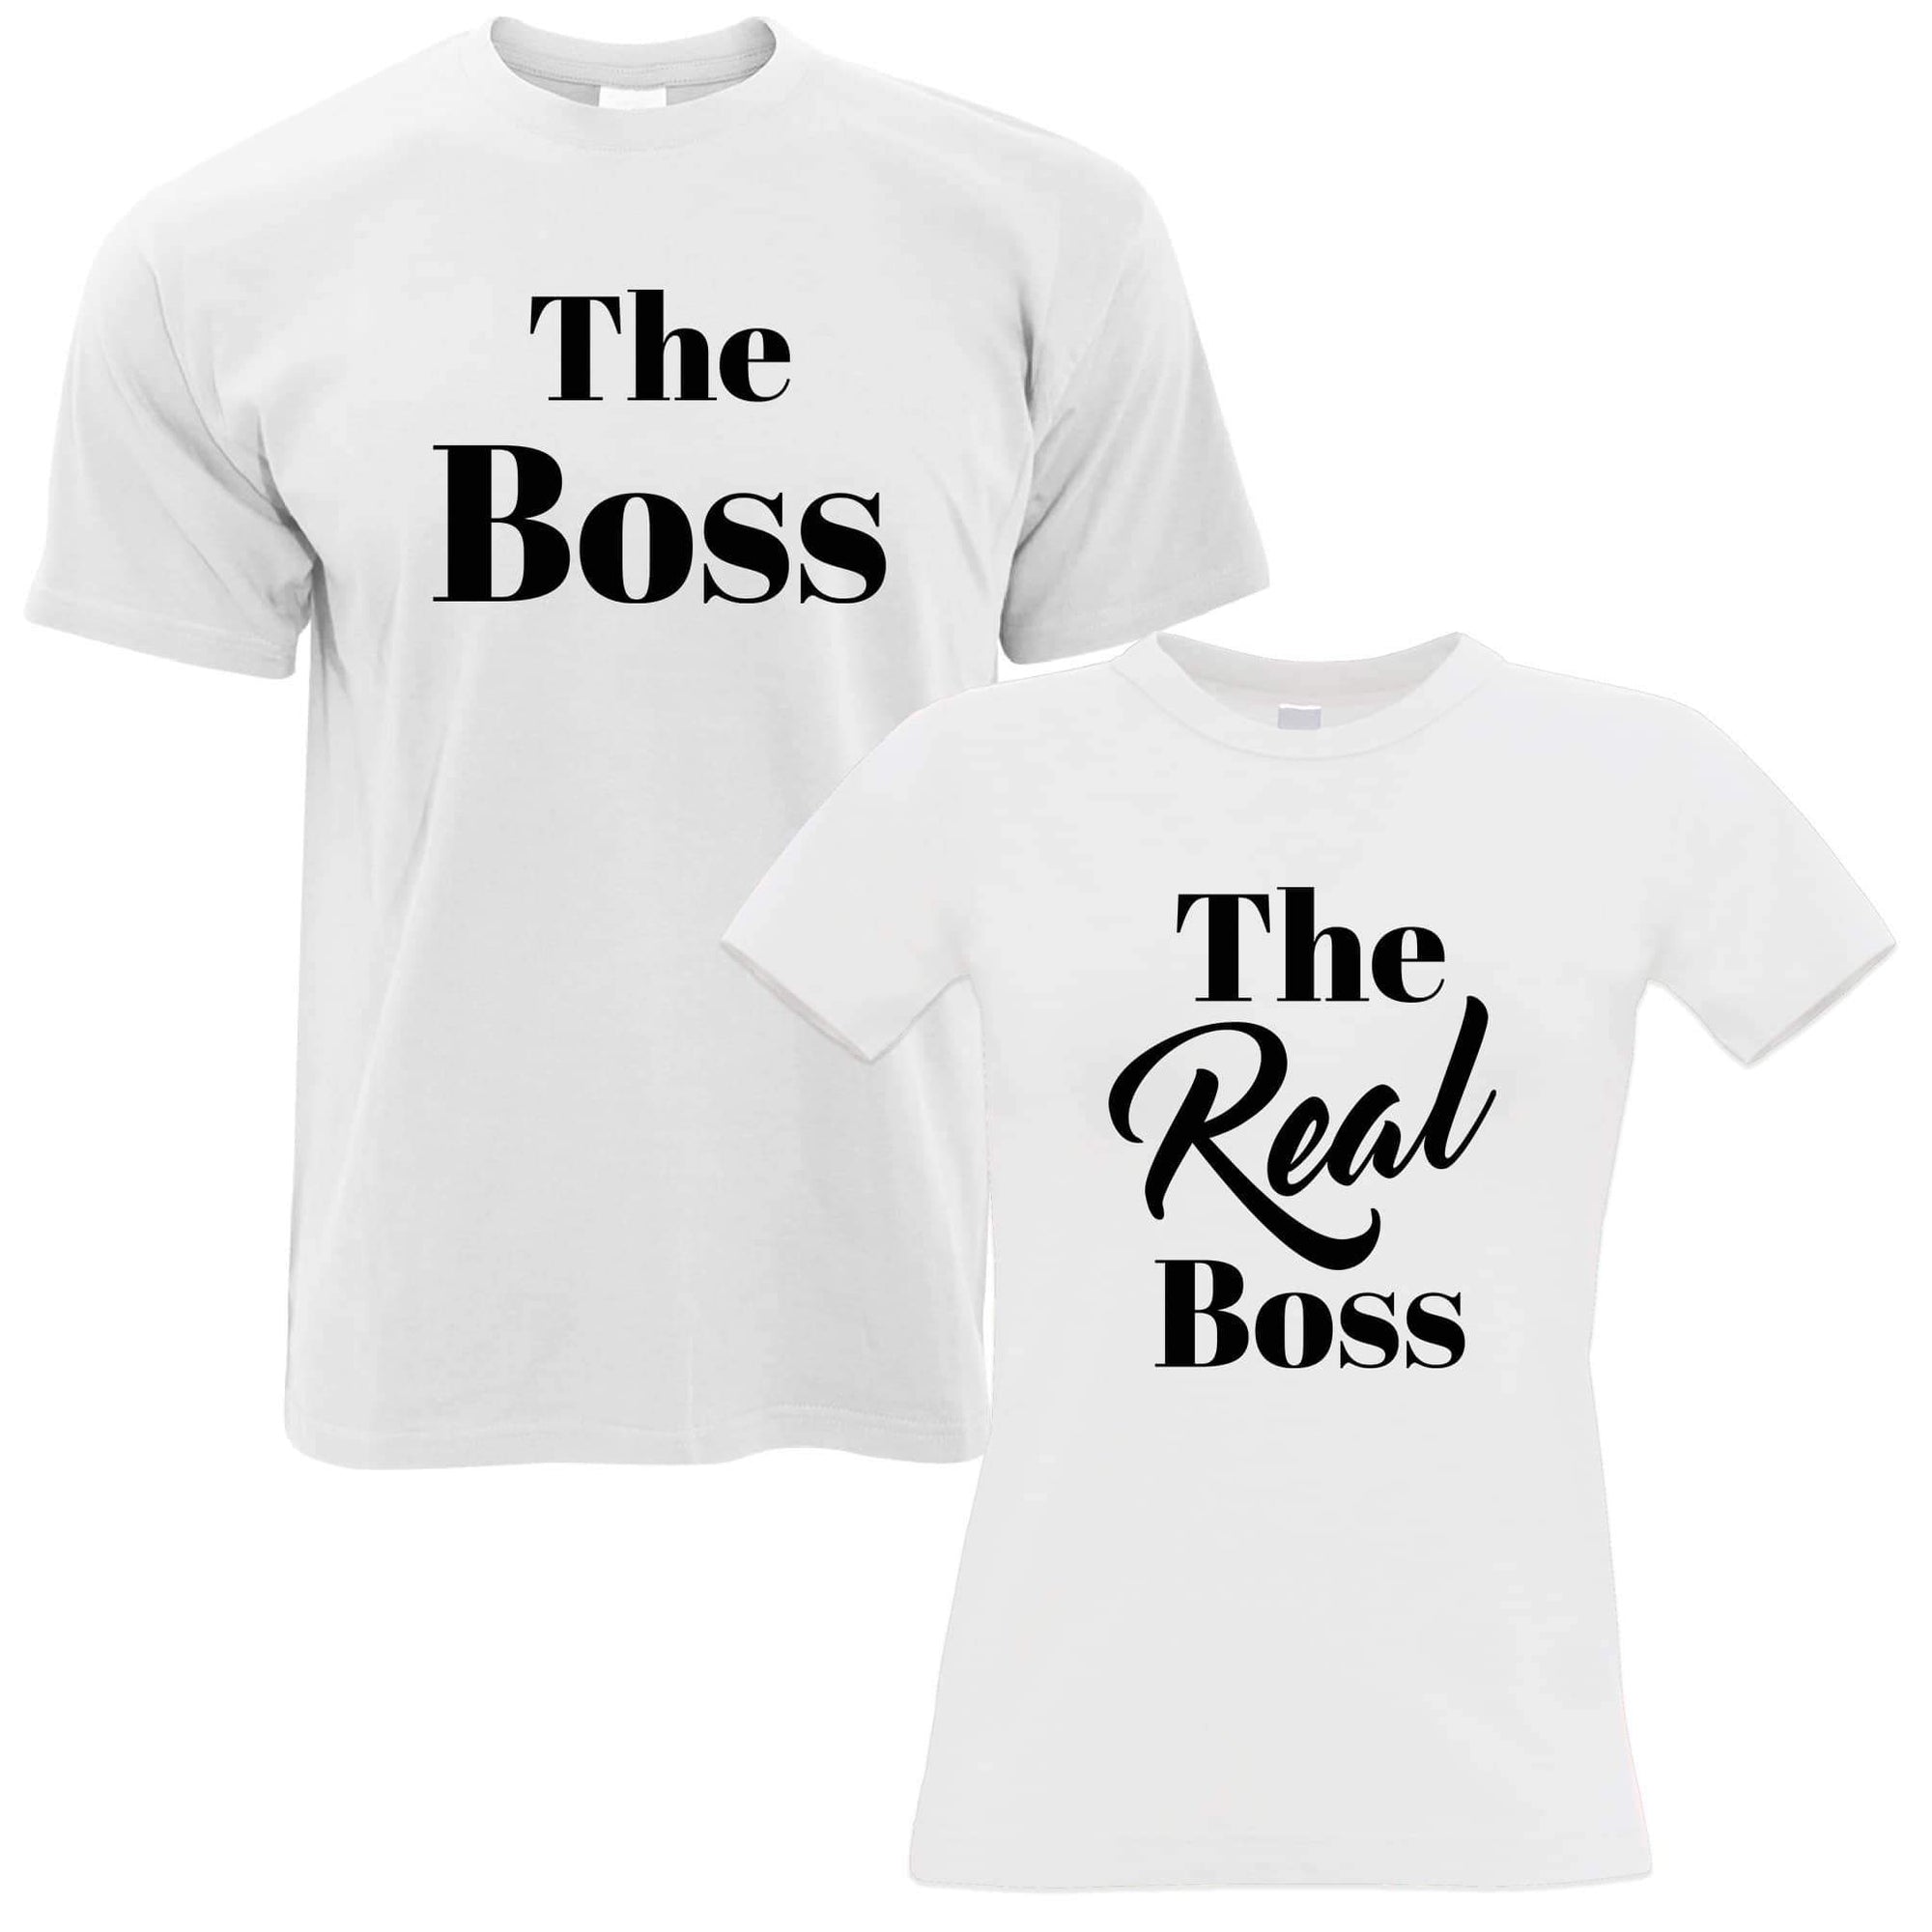 the boss and the real boss t shirts